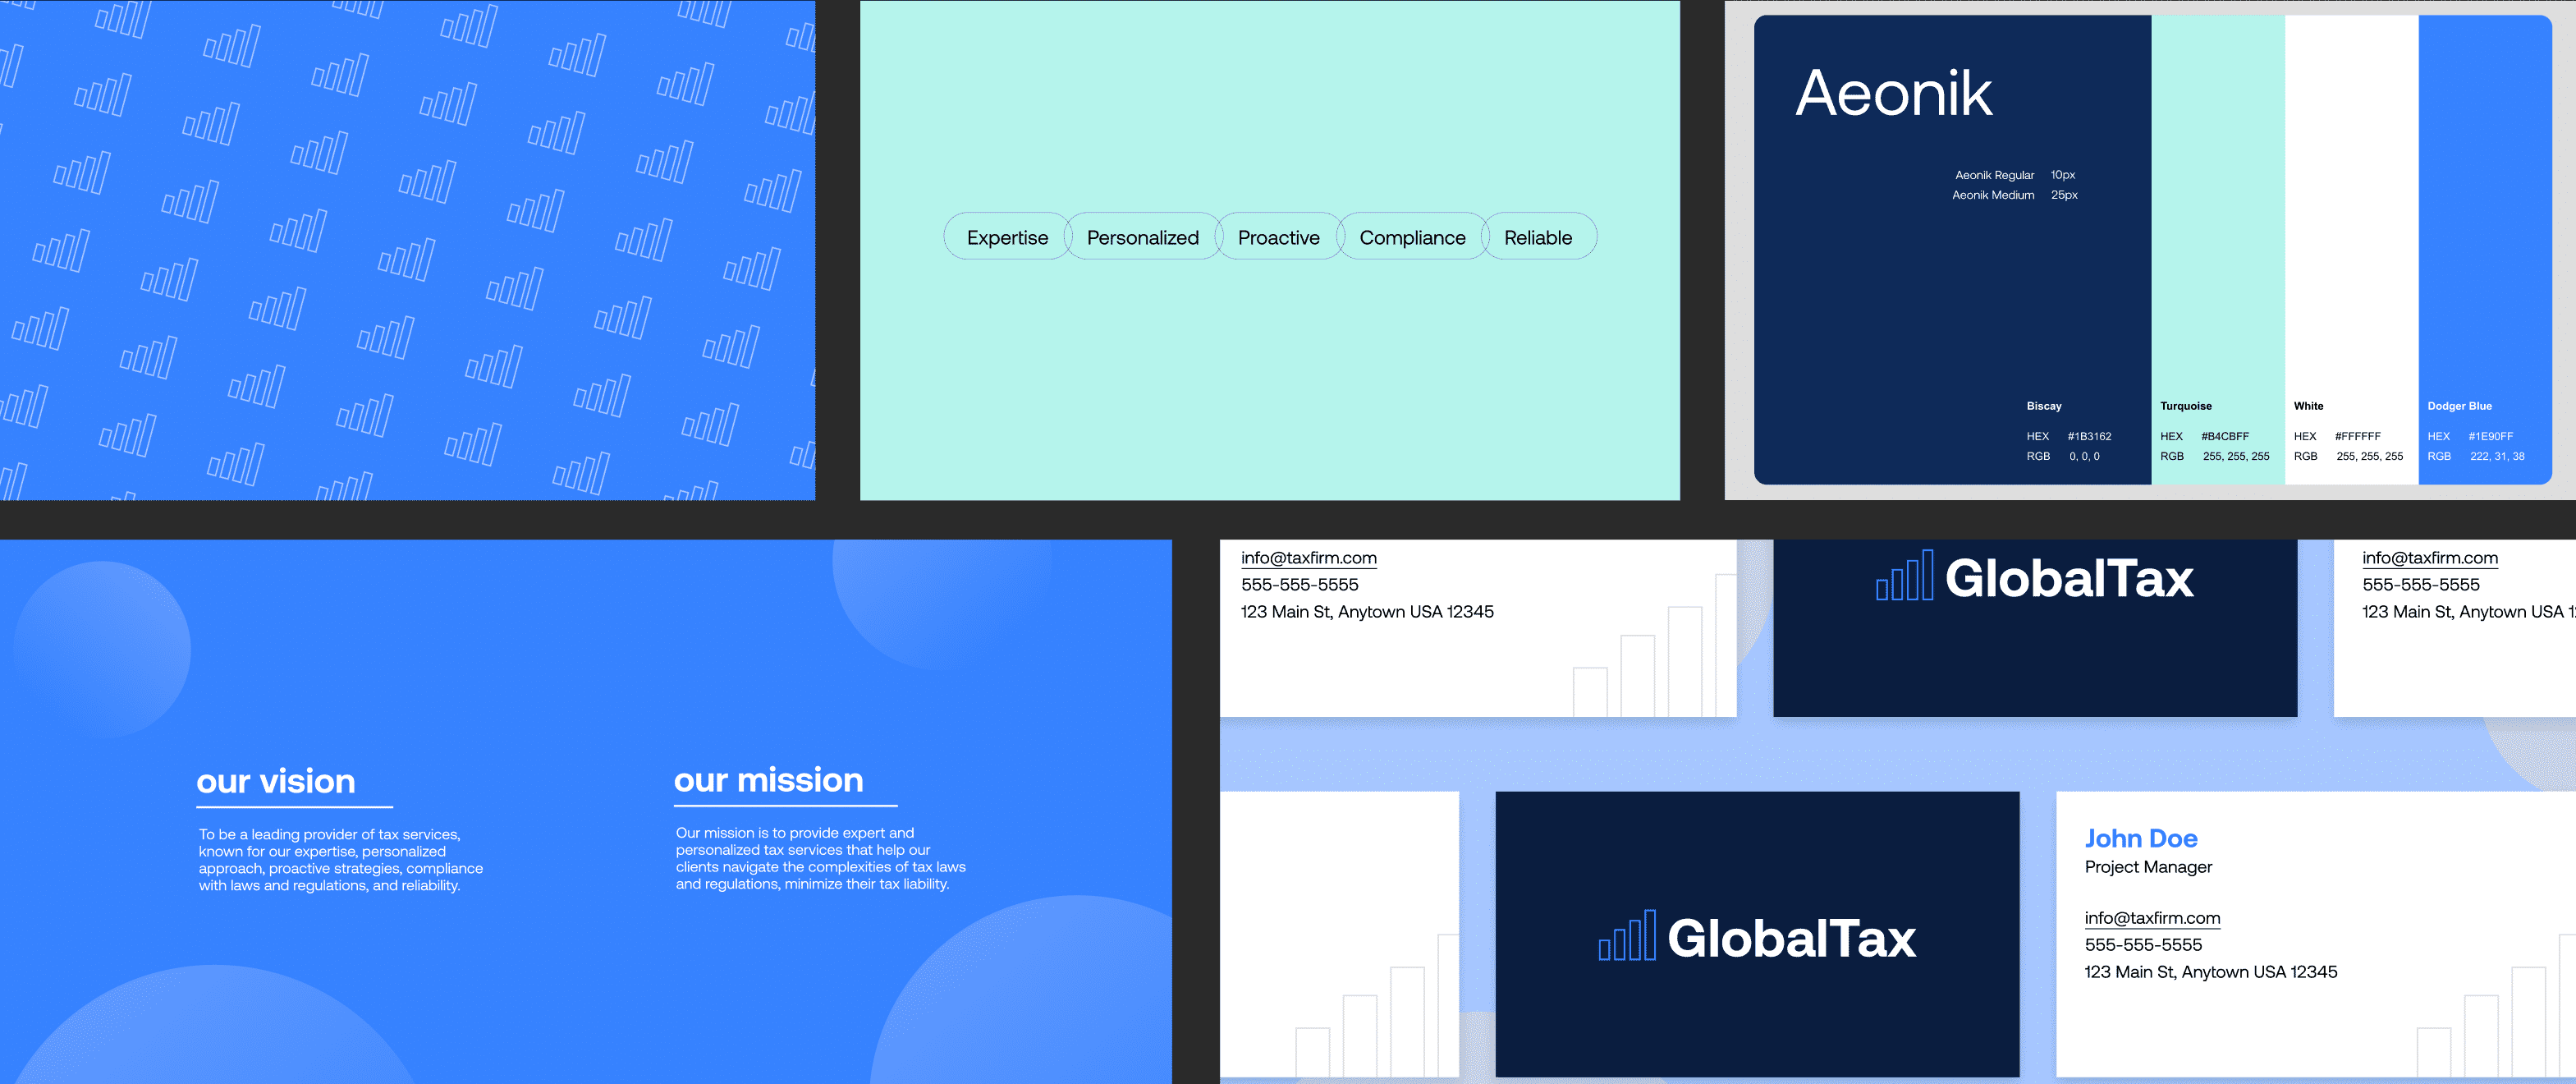 Discover GlobalTax's New Branding: A Brand Vision Marketing Case Study